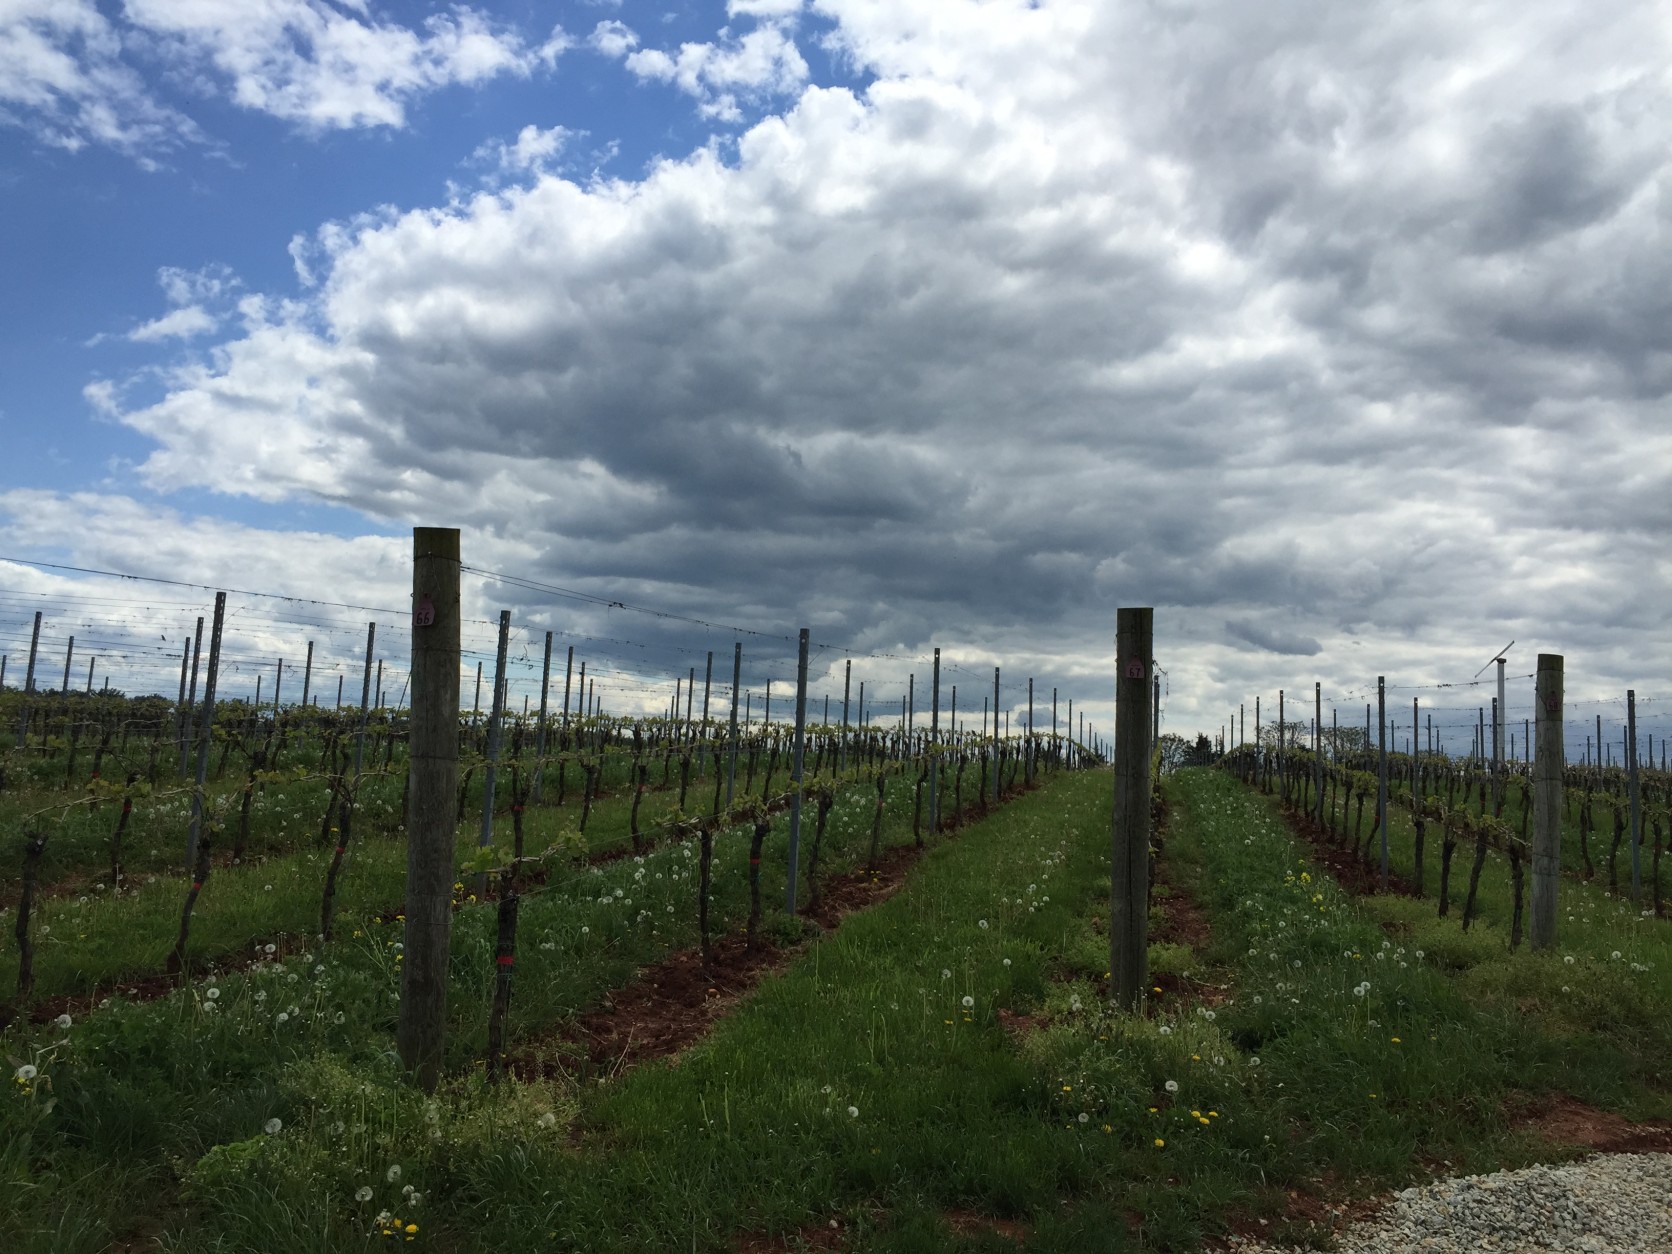 Rain hurting winery numbers, but the grapes could rebound